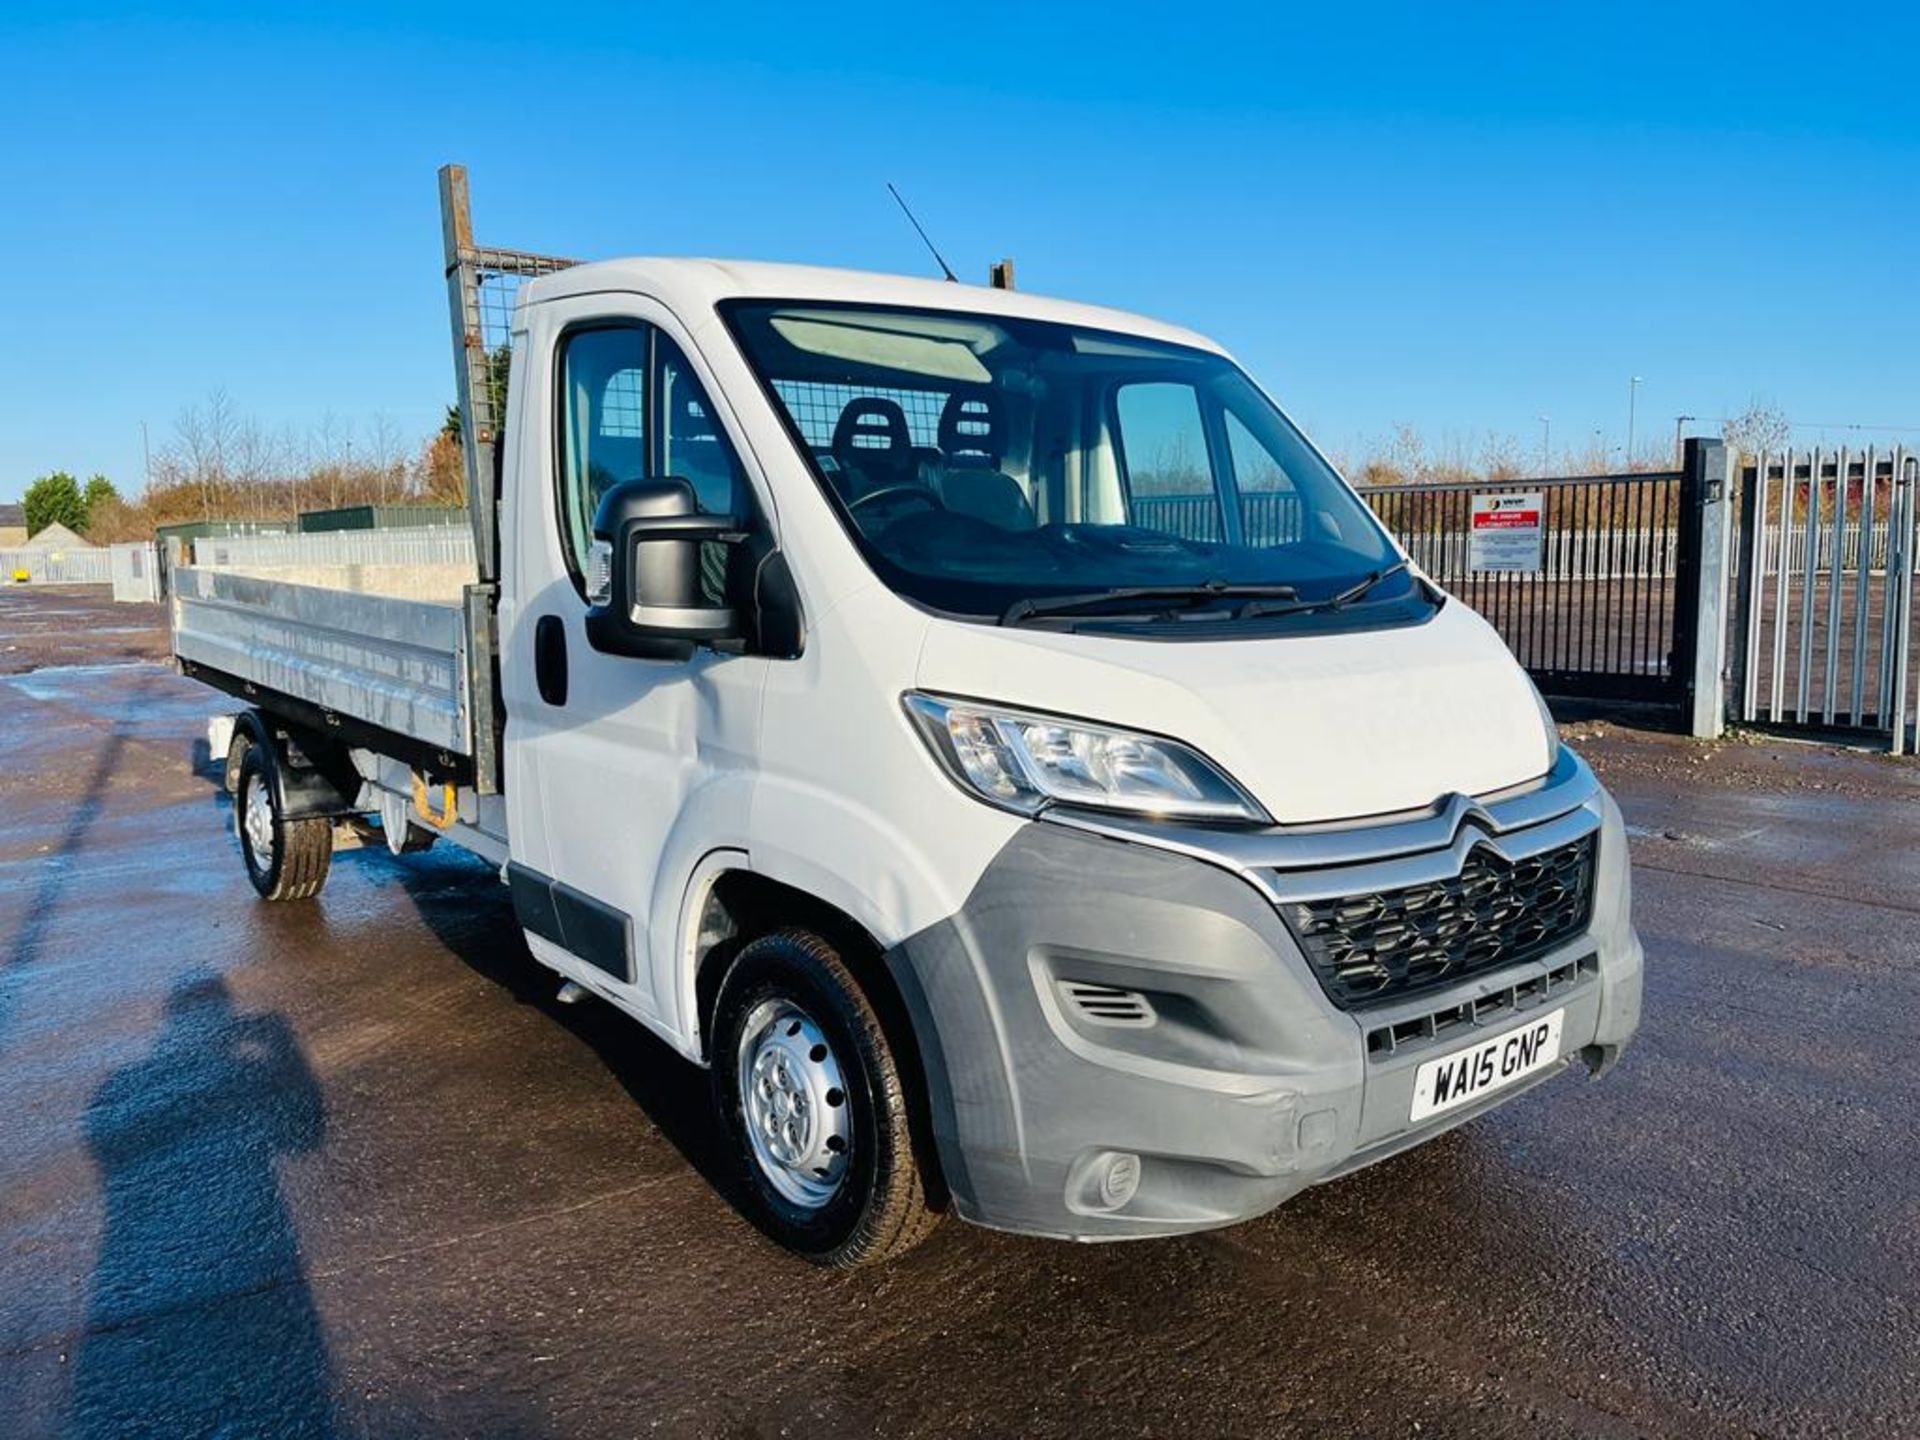 ** ON SALE ** Citroen Relay 35 2.2 HDI 130 LWB Alloy Tipper 2015 '15 Reg' Only 105,090 Miles - Image 2 of 31